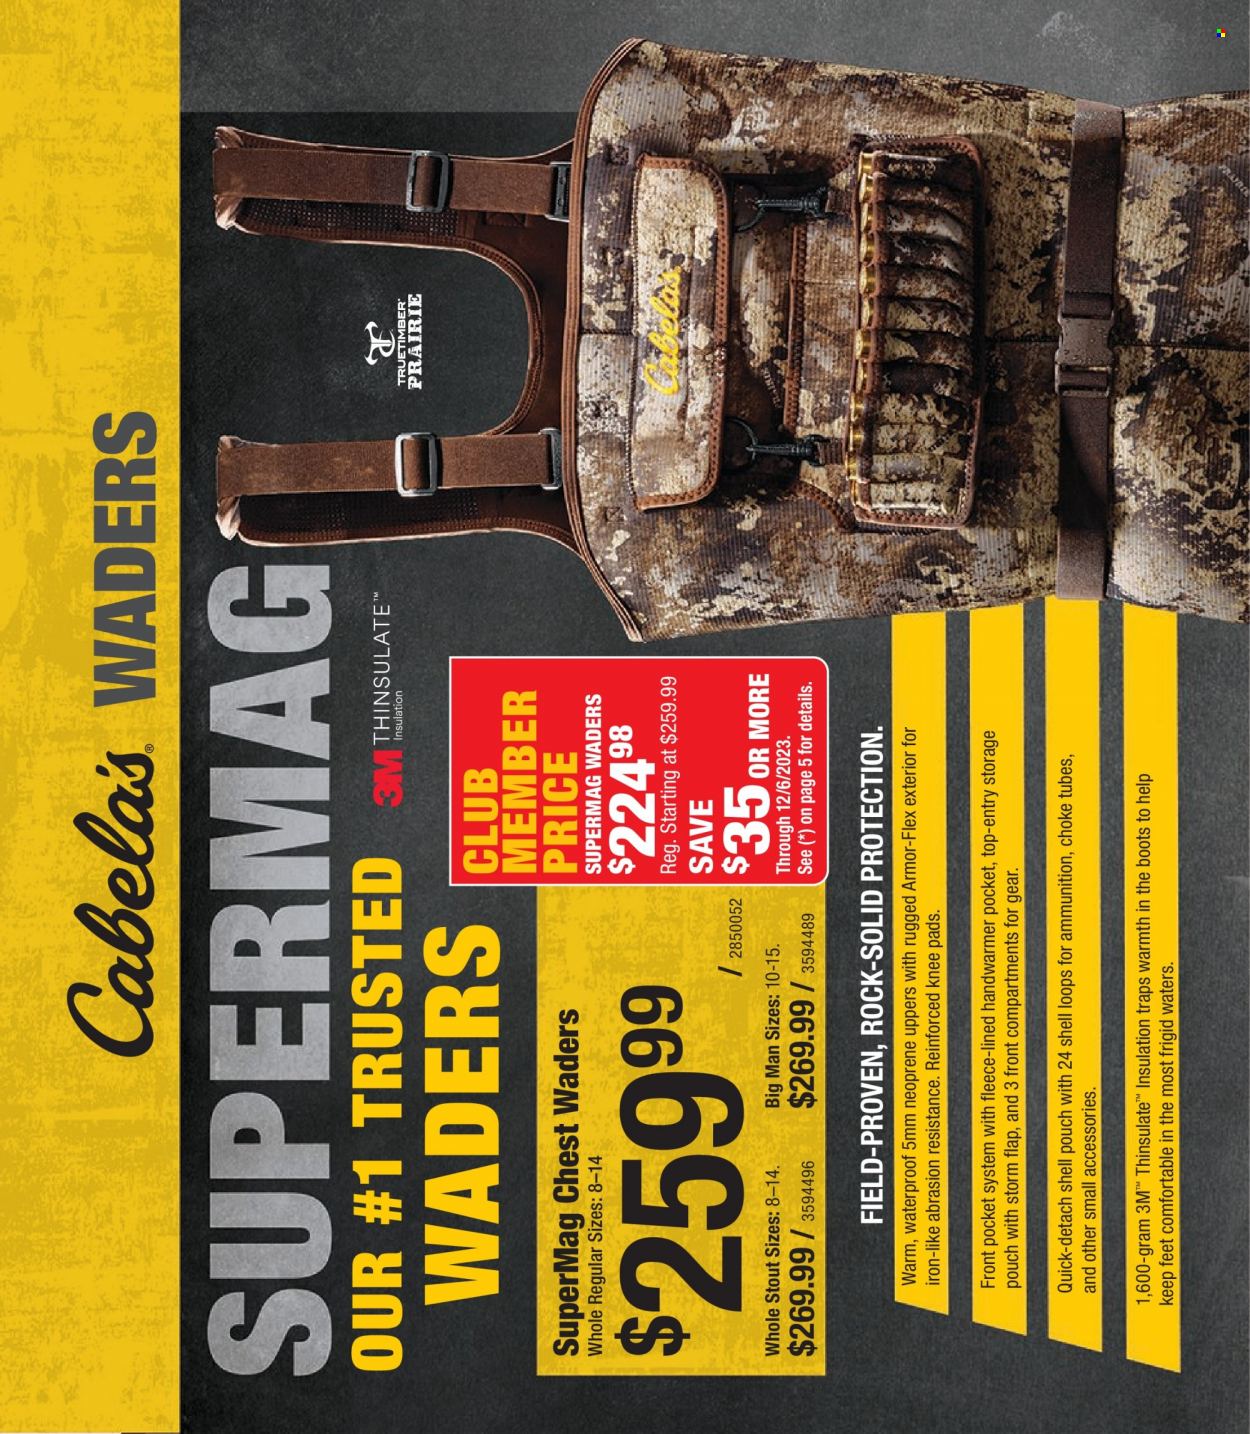 Bass Pro Shops flyer . Page 22.